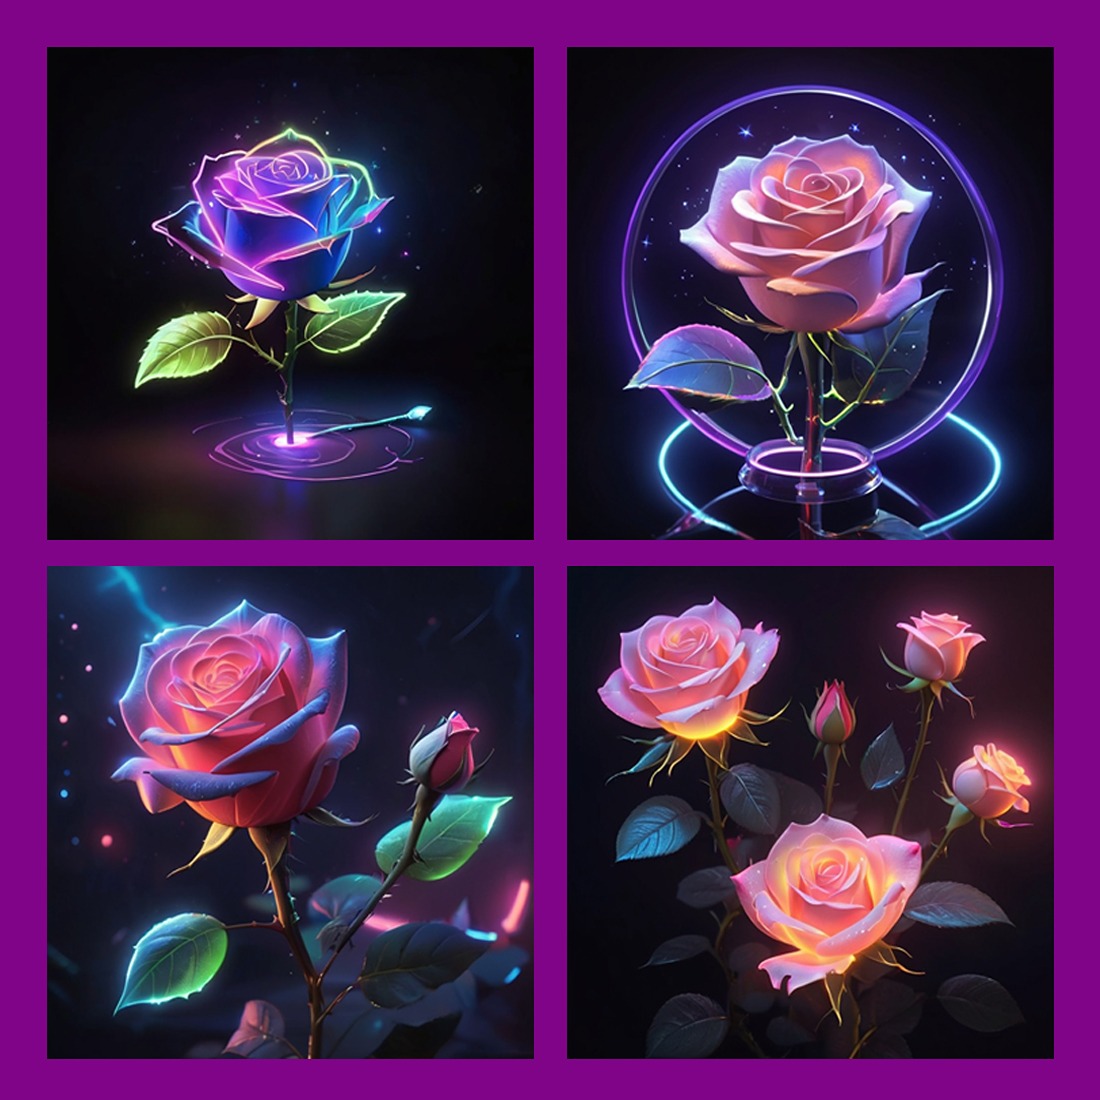 Rose - Beautiful Neon Effects Images Total = 04 cover image.